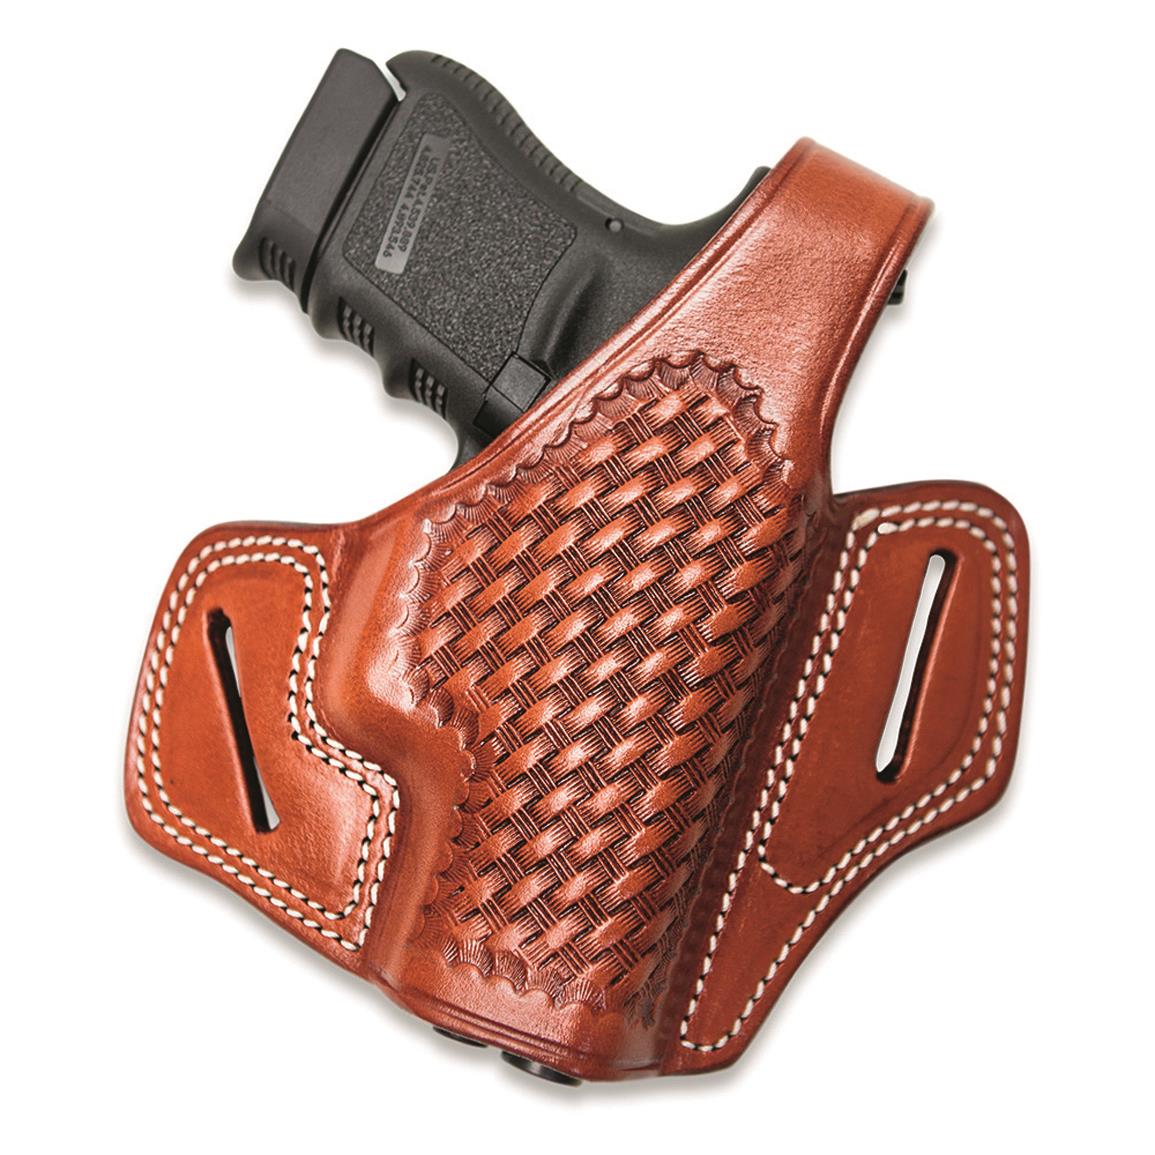 Cebeci Arms Leather Basketweave Pancake Holster, S&W M&P9 Shield, Right Hand